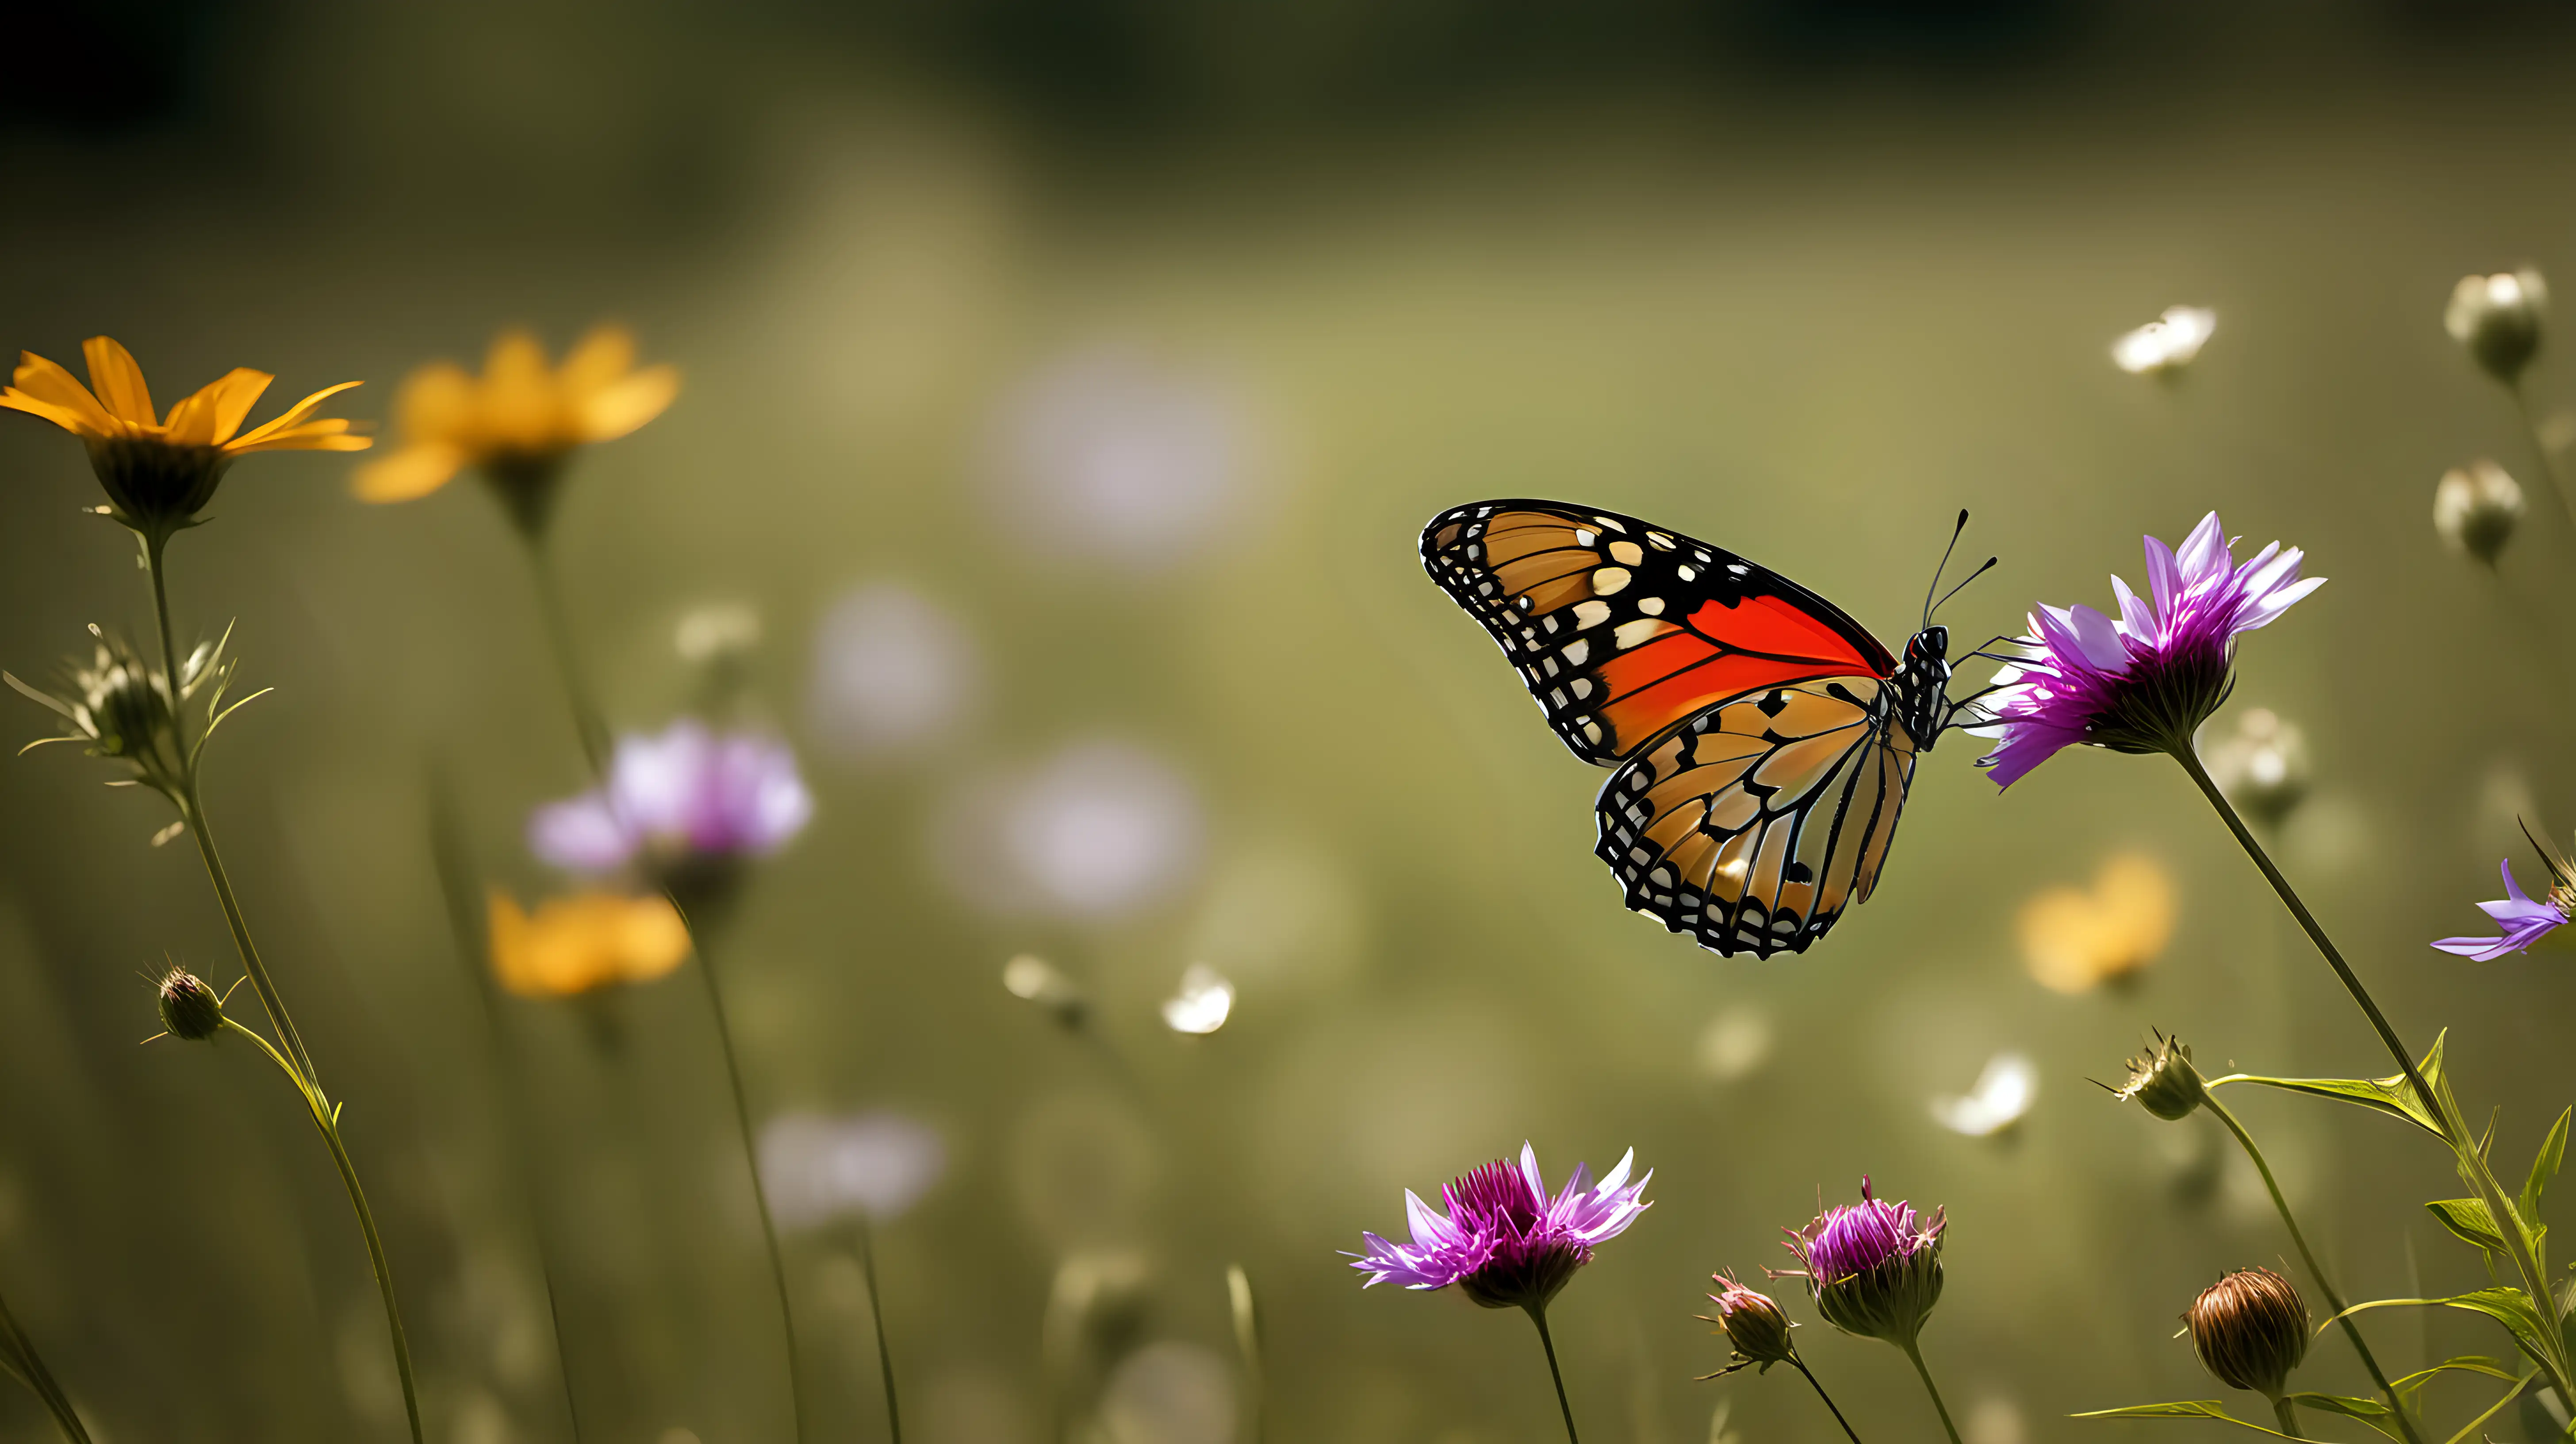 Butterfly Flying Among Wildflowers Capturing Freedom and Joy